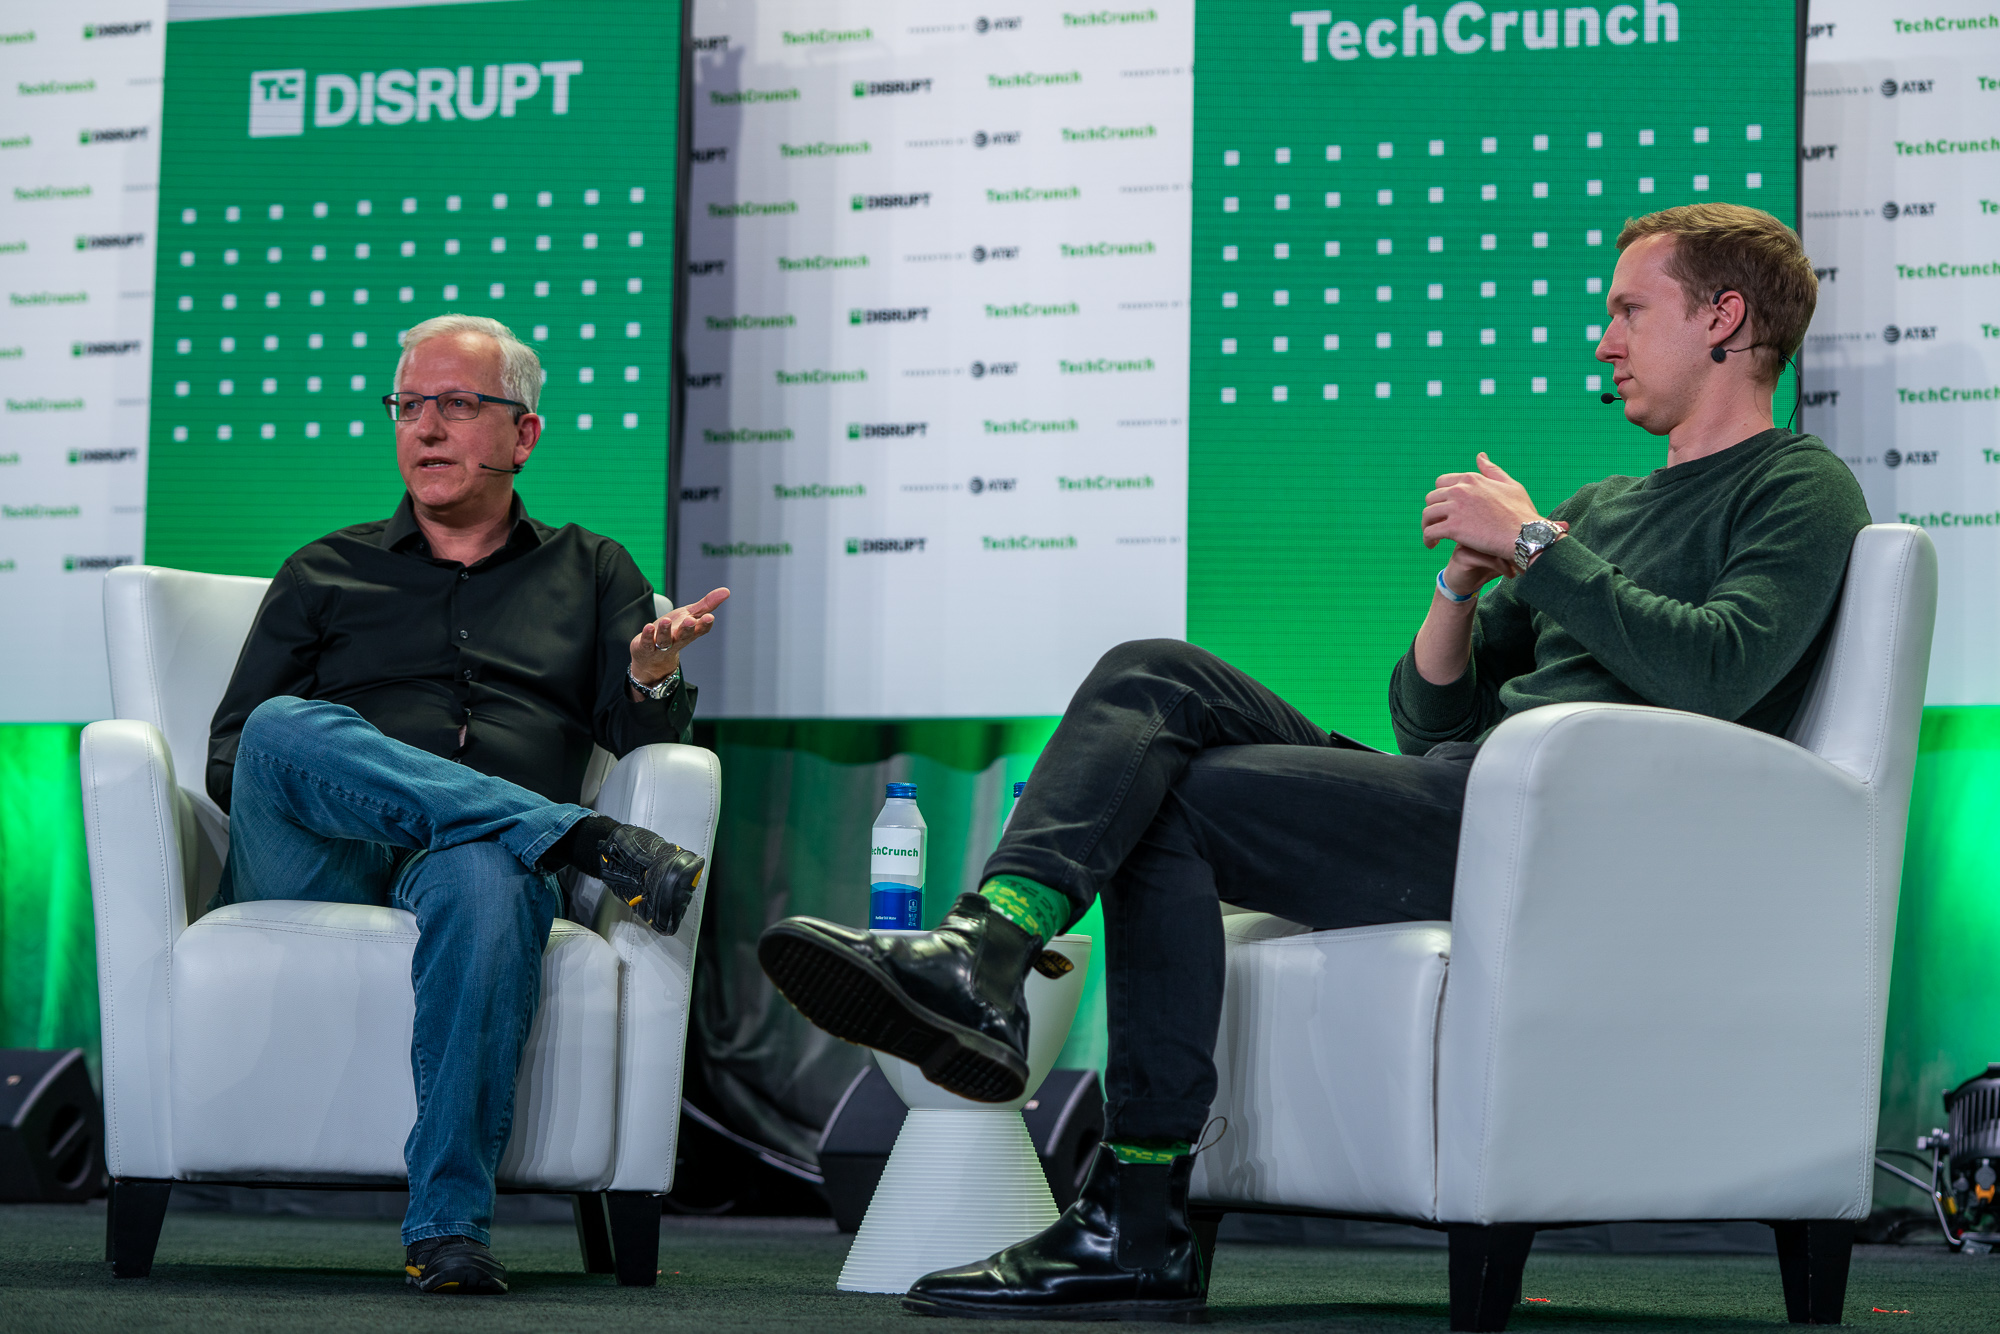 Mike Verdu, VP of Games at Netflix and Lucas Matney from TechCrunch speak about "whether game streaming can go mainstream" at TechCrunch Disrupt in San Francisco on October 18, 2022. Image Credit: Haje Kamps / TechCrunch